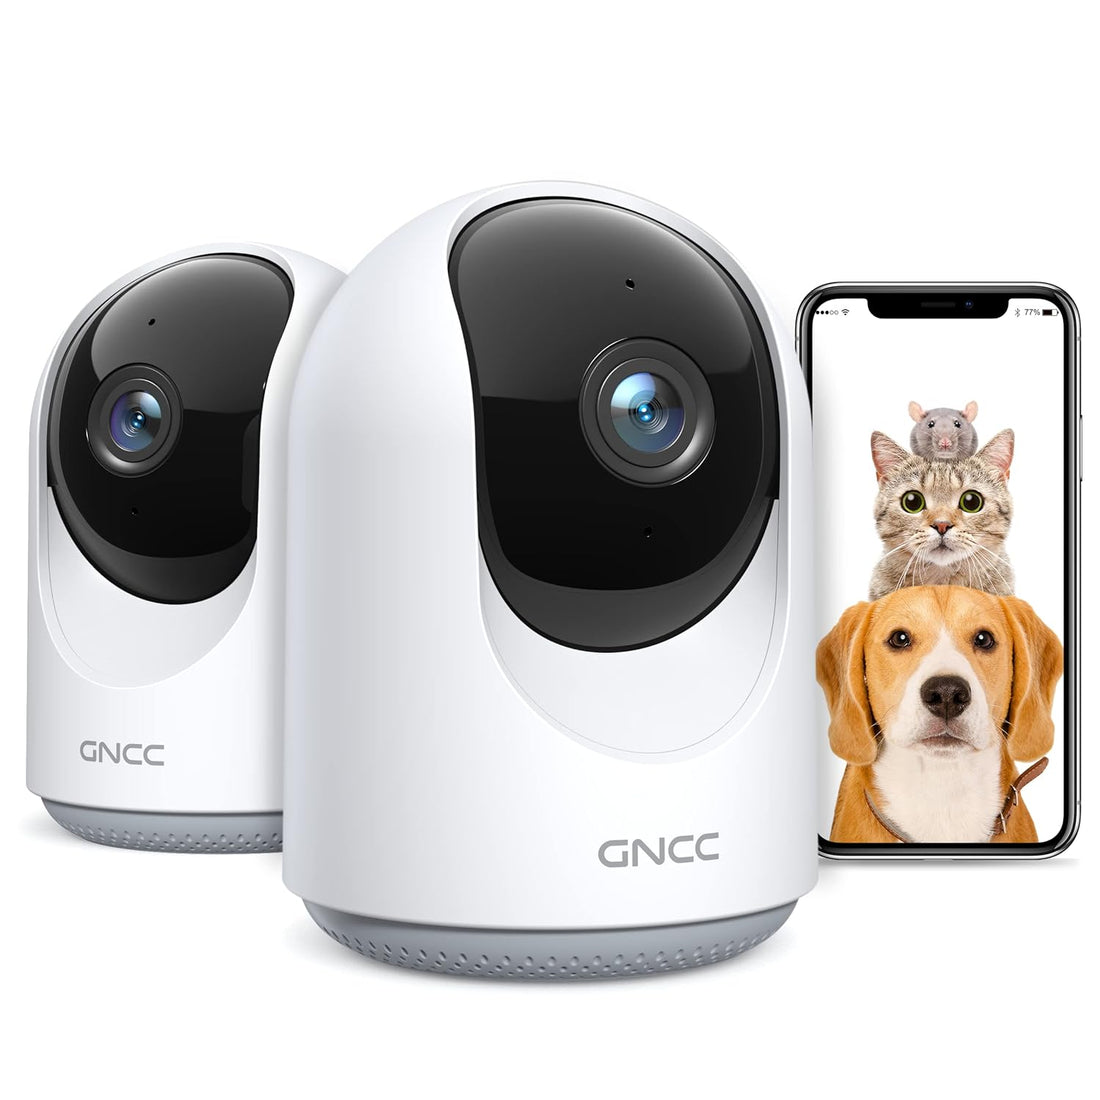 GNCC Pet Camera with Phone APP, Indoor Camera for Baby/Pet/Security(2 Pack), Wi-Fi Camera with Motion/Sound Detection, SD&Cloud Storage, 2-Way Audio, Horizontal Remote, Manual Up and Down (P1-2)